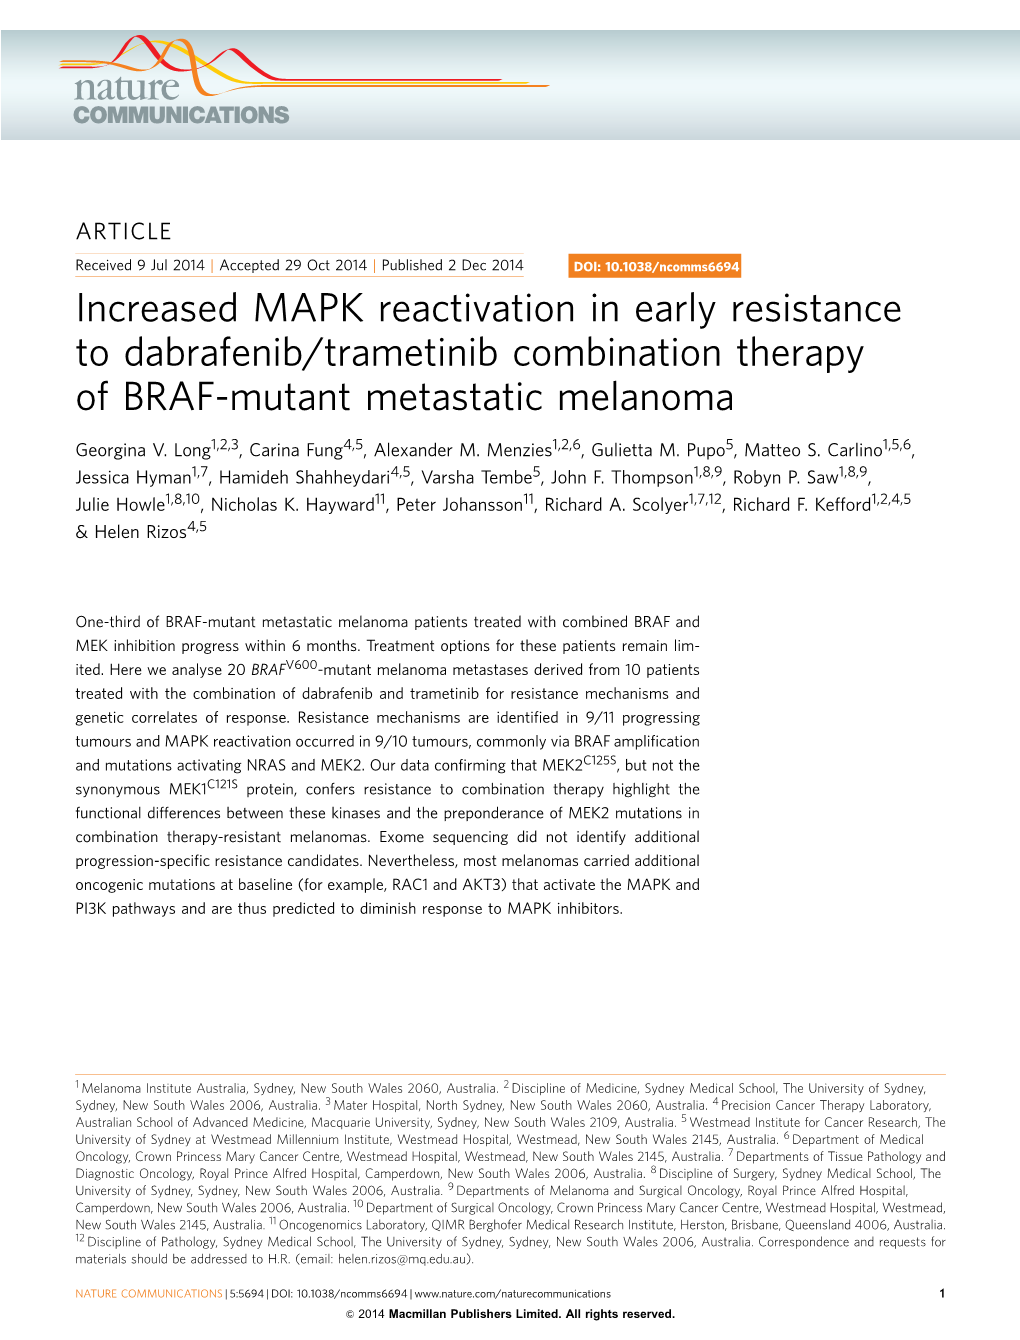 Increased MAPK Reactivation in Early Resistance to Dabrafenib/Trametinib Combination Therapy of BRAF-Mutant Metastatic Melanoma